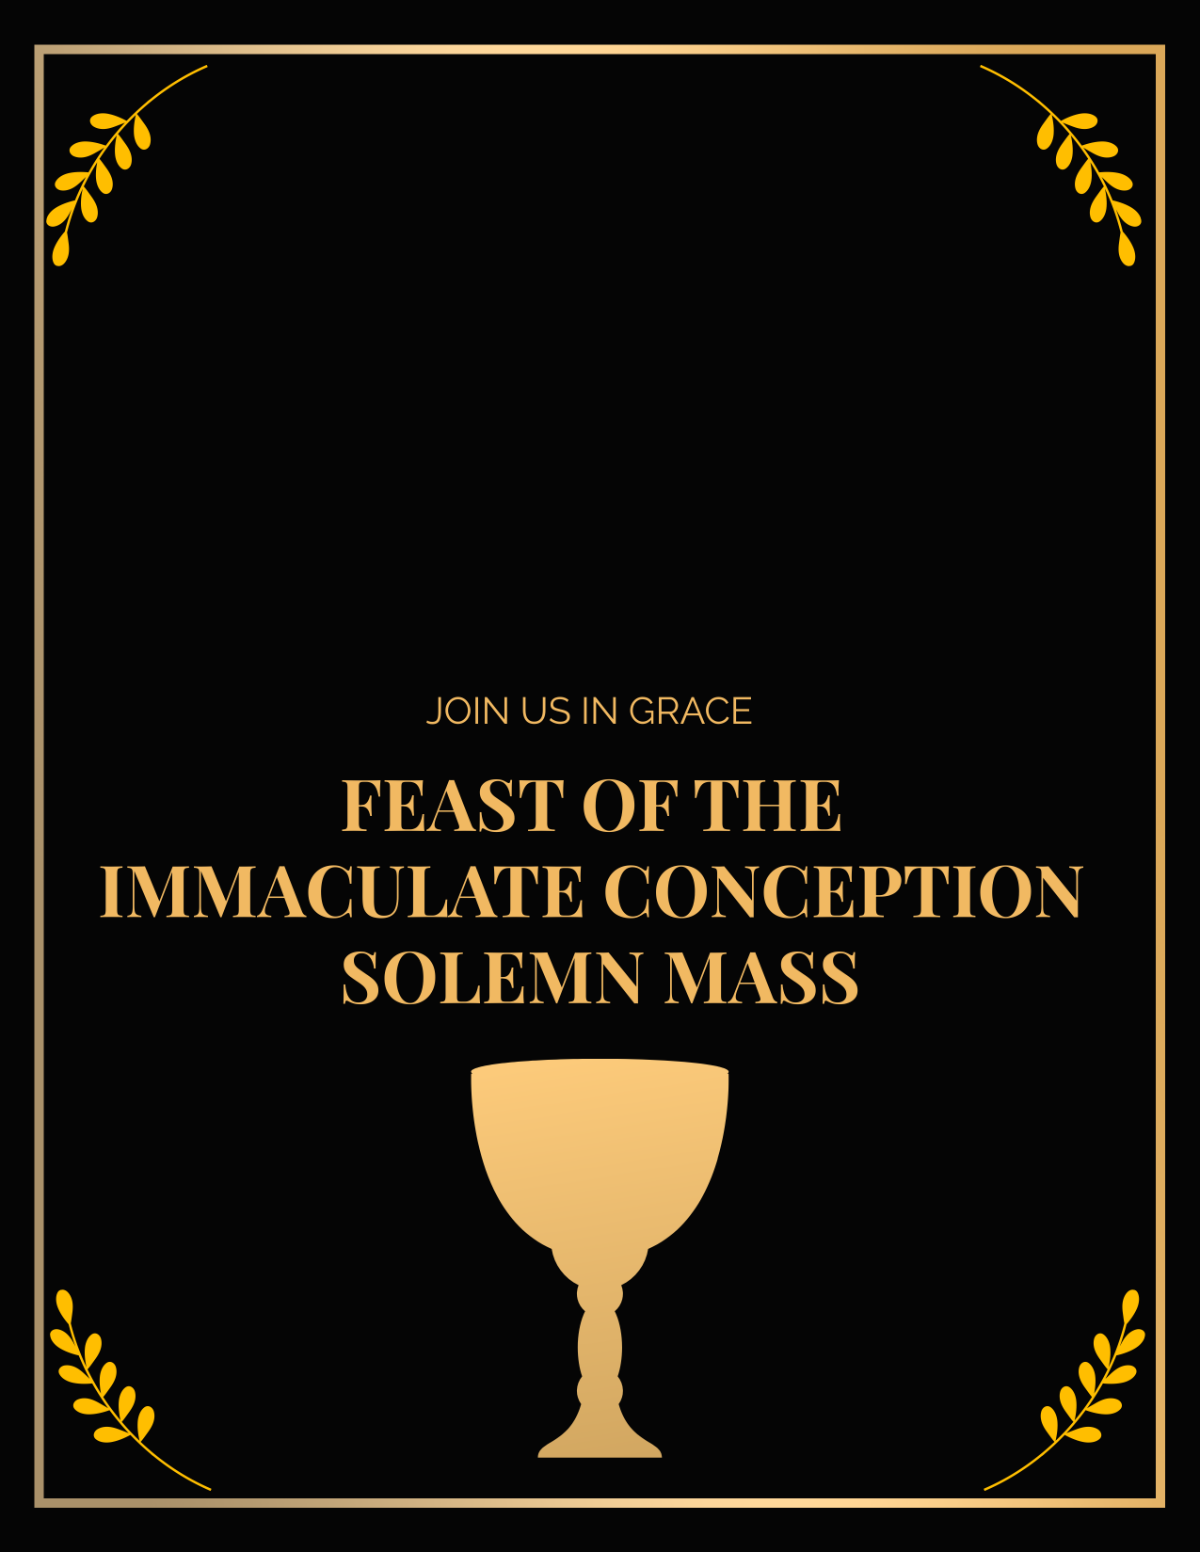 Feast of the Immaculate Conception Day Flyer Template